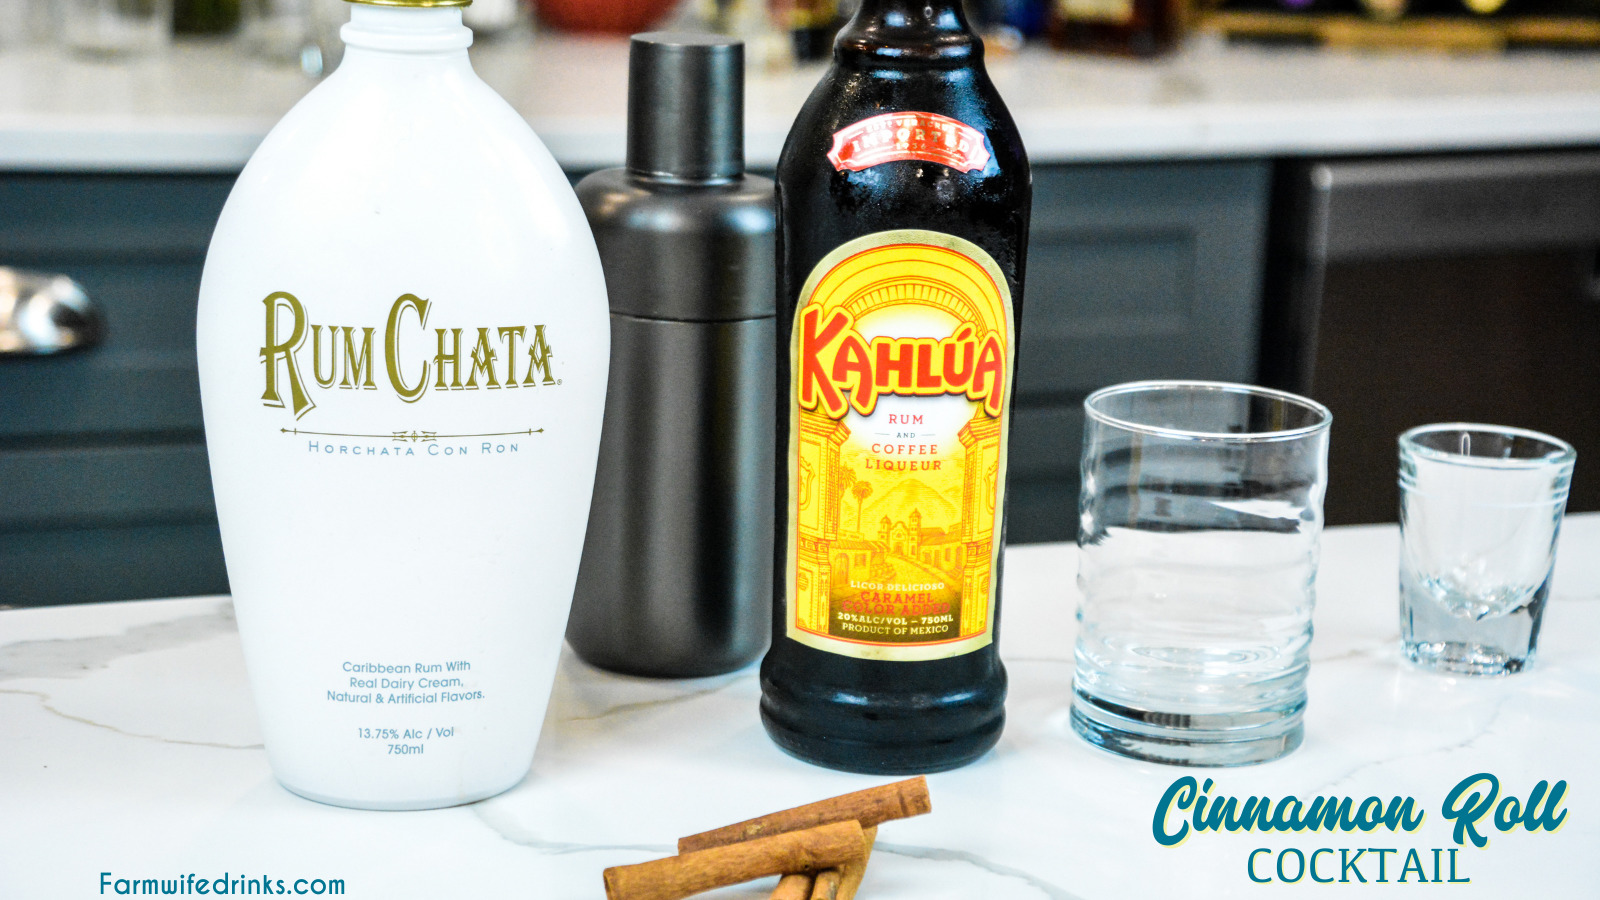 Cinnamon Roll Cocktail ingredients - Rumchata and Kahlua